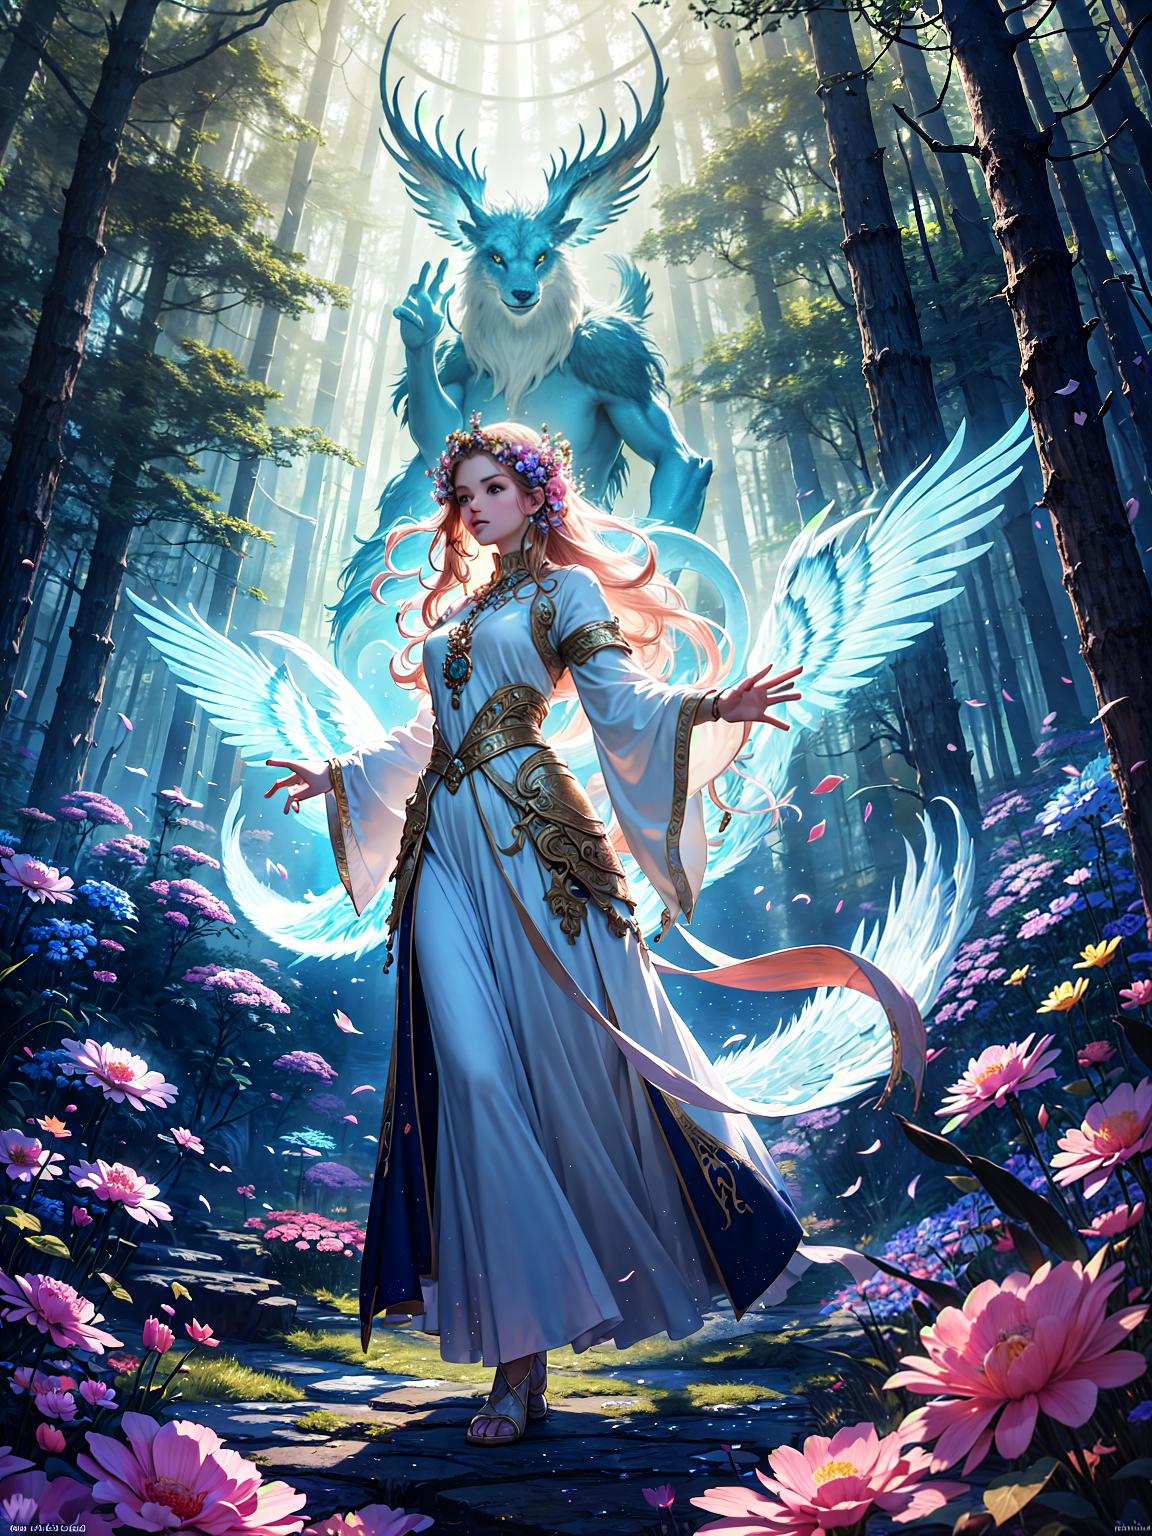  master piece, best quality, ultra detailed, highres, 4k.8k, Mythical beast, Standing gracefully, gazing at the woman, Majestic, BREAK Fantasy illustration of a mythical creature., Enchanted forest, Petals, magical orbs, ancient ruins, glowing flowers, BREAK Mysterious and enchanting, Soft glowing light, hints of magic in the air, ethereal surroundings,